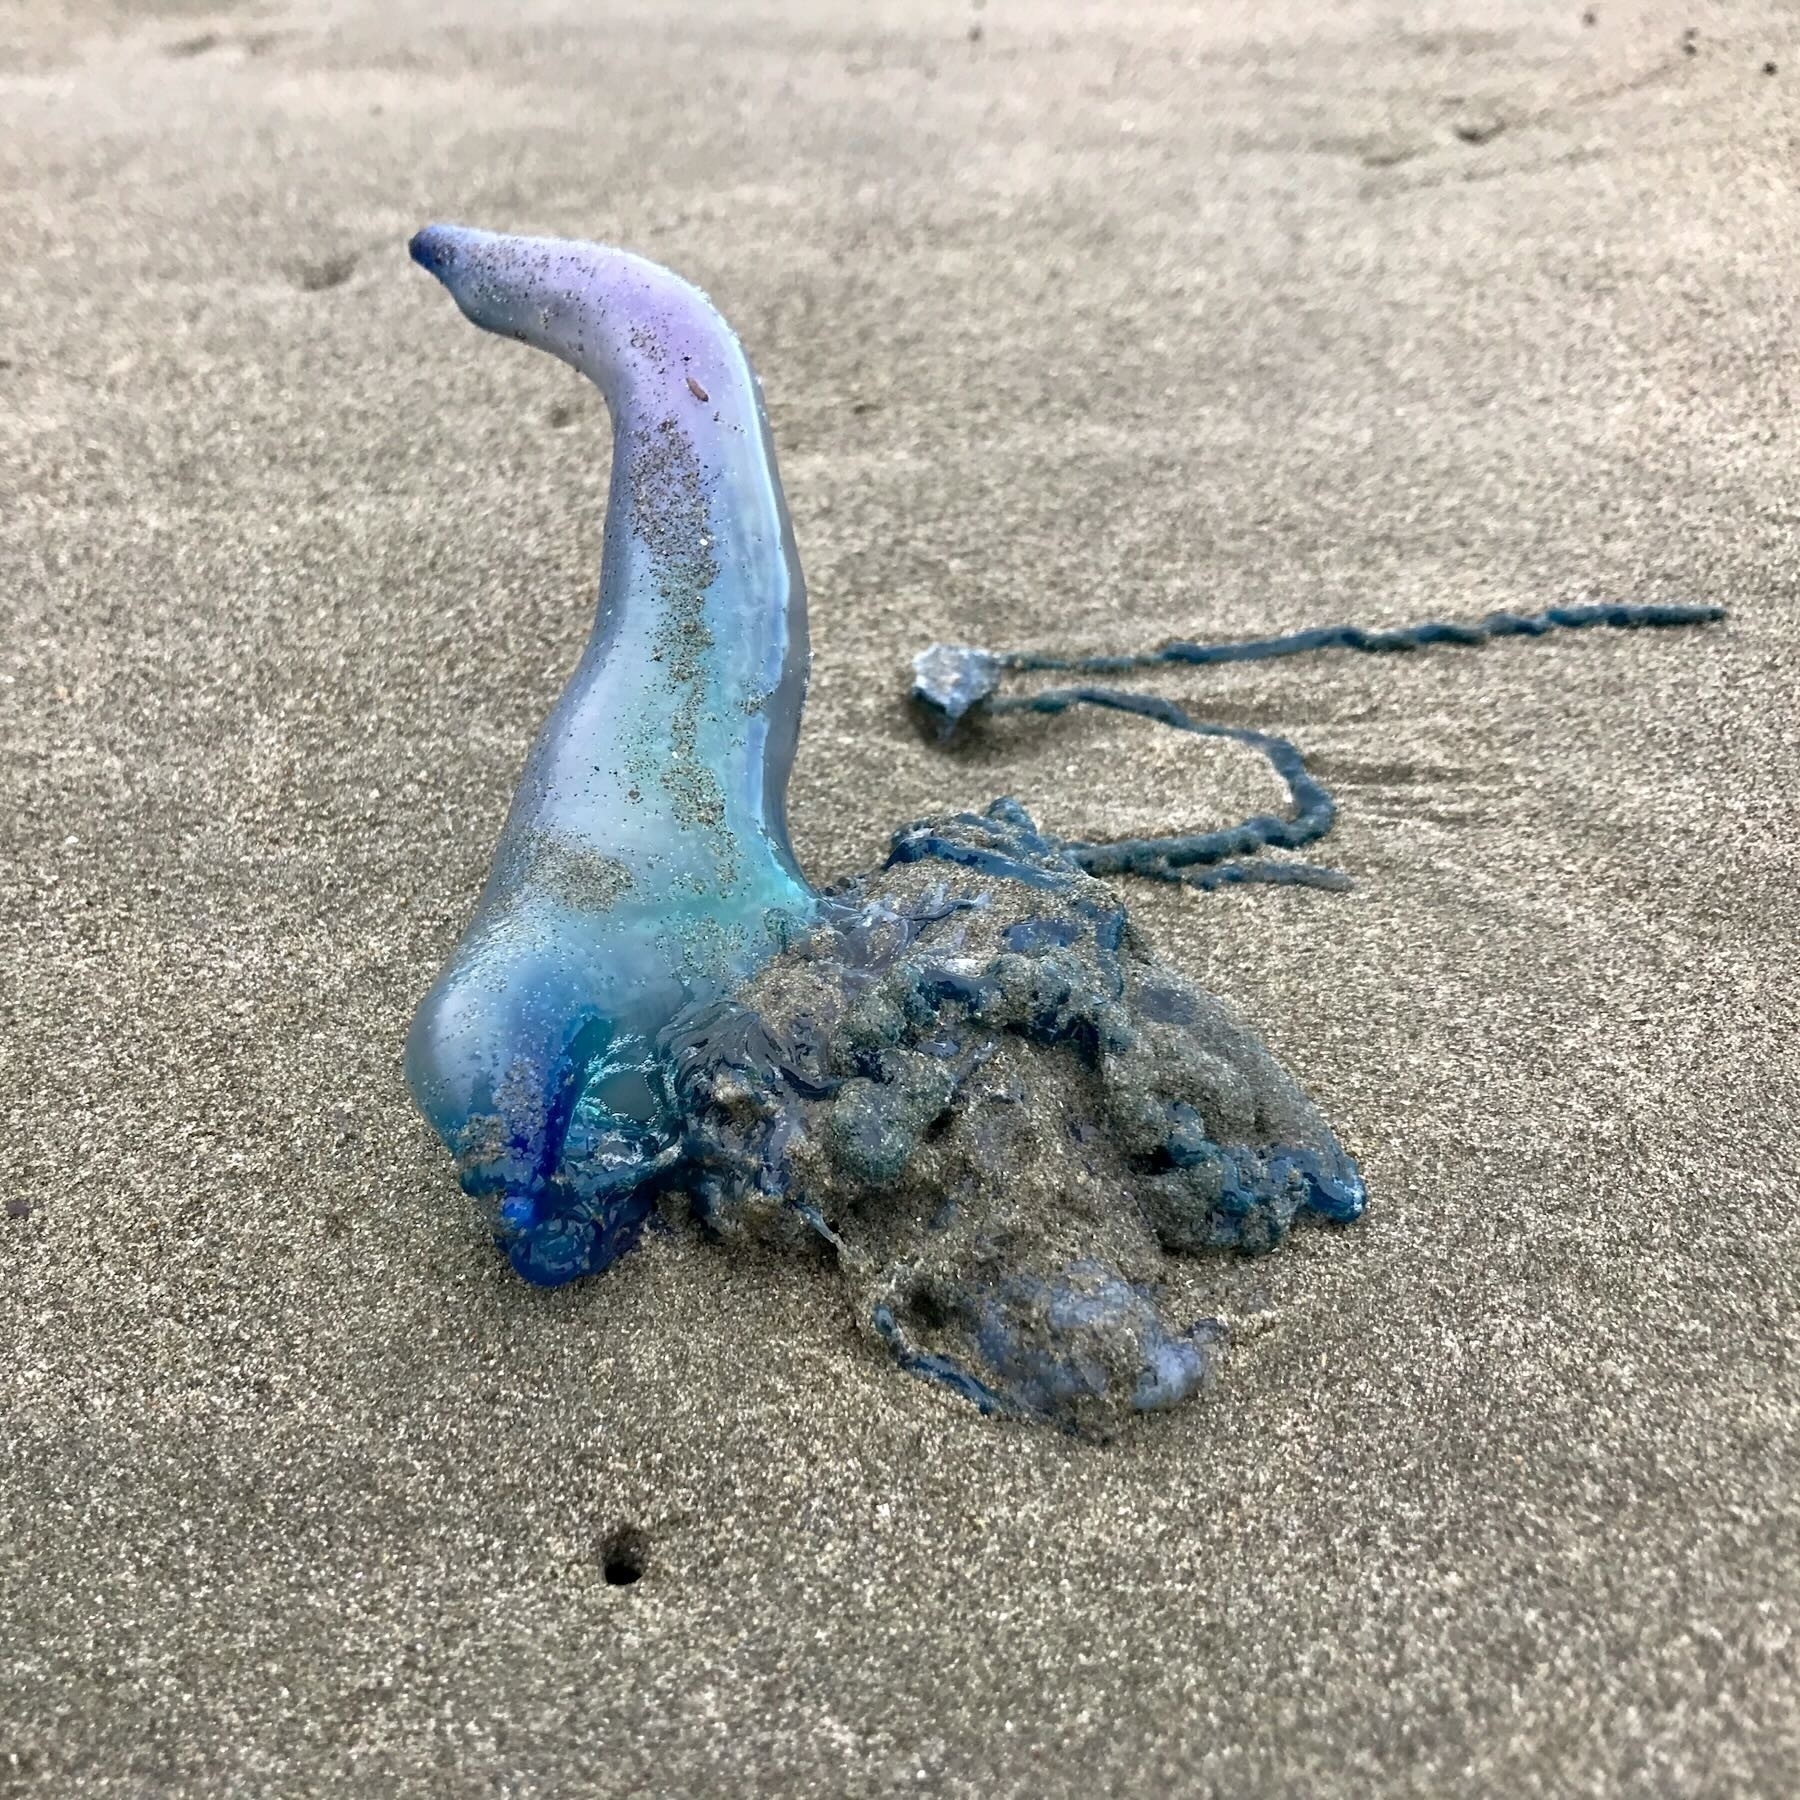 A bluish gas-filled bladder with a long tail. 